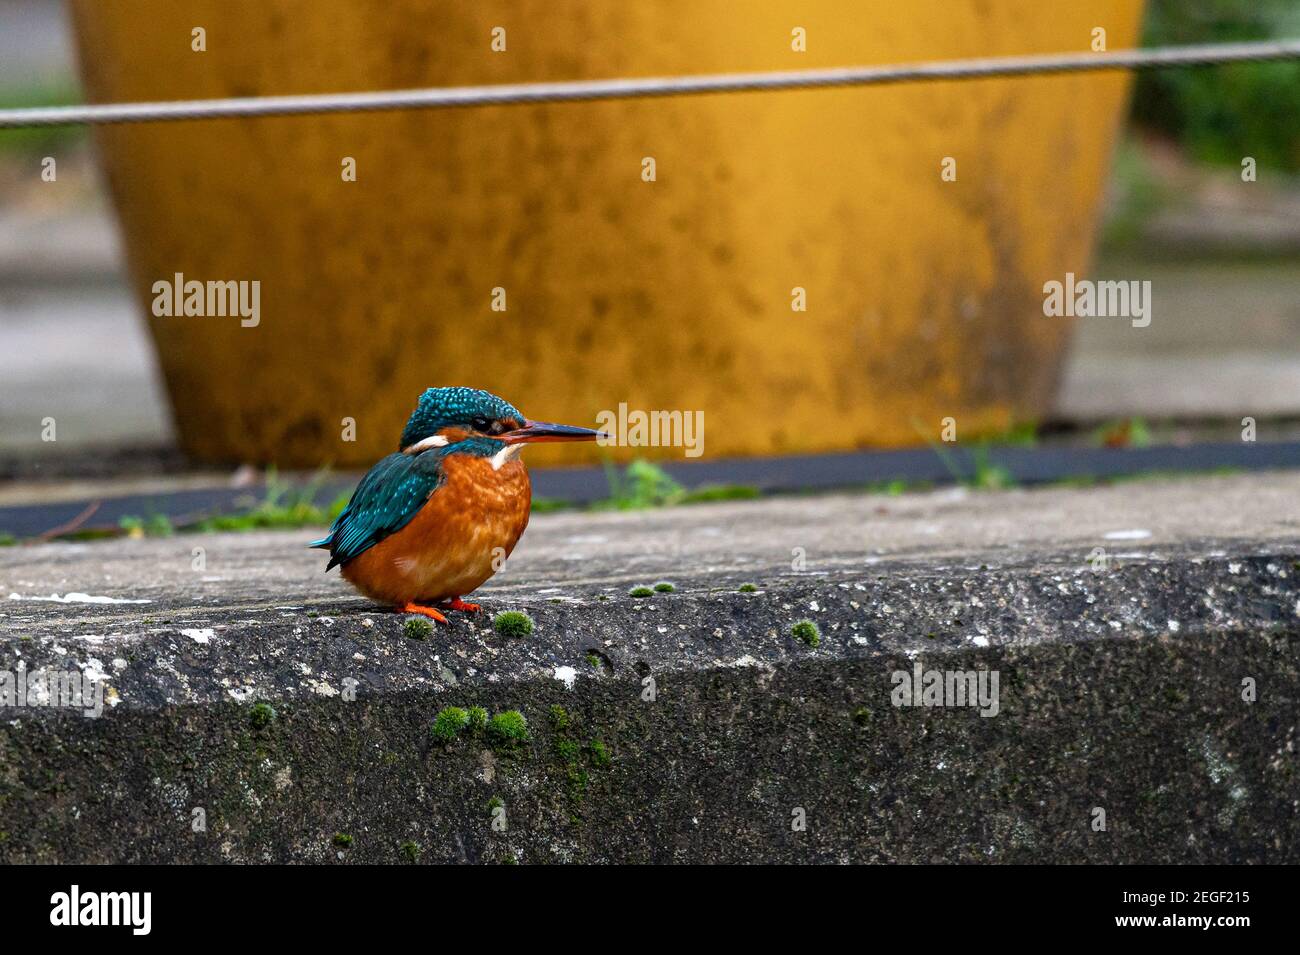 Female common kingfisher, alcedo atthis, urban town setting with reduced people activity due to pandemic, perched in front of restaurant plant pots Stock Photo